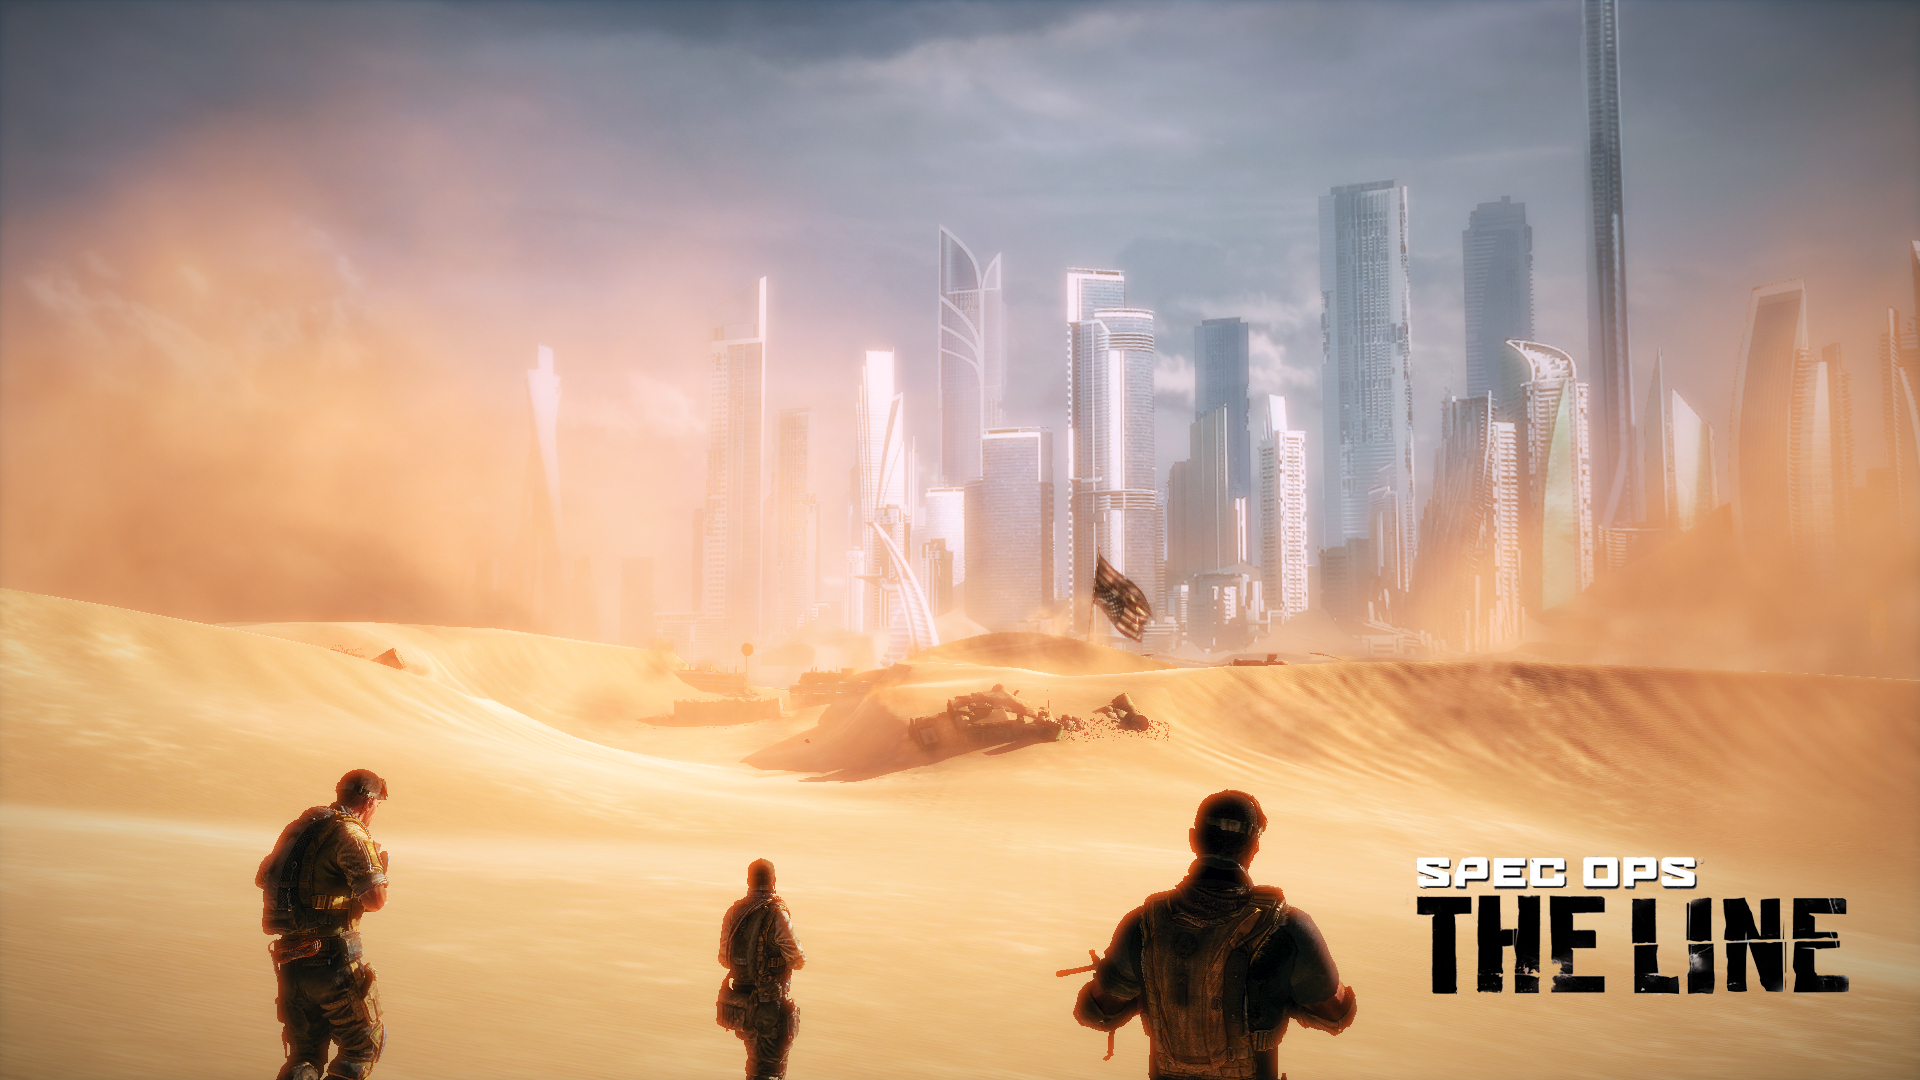 11 Spec Ops: The Line HD Wallpapers | Backgrounds - Wallpaper Abyss